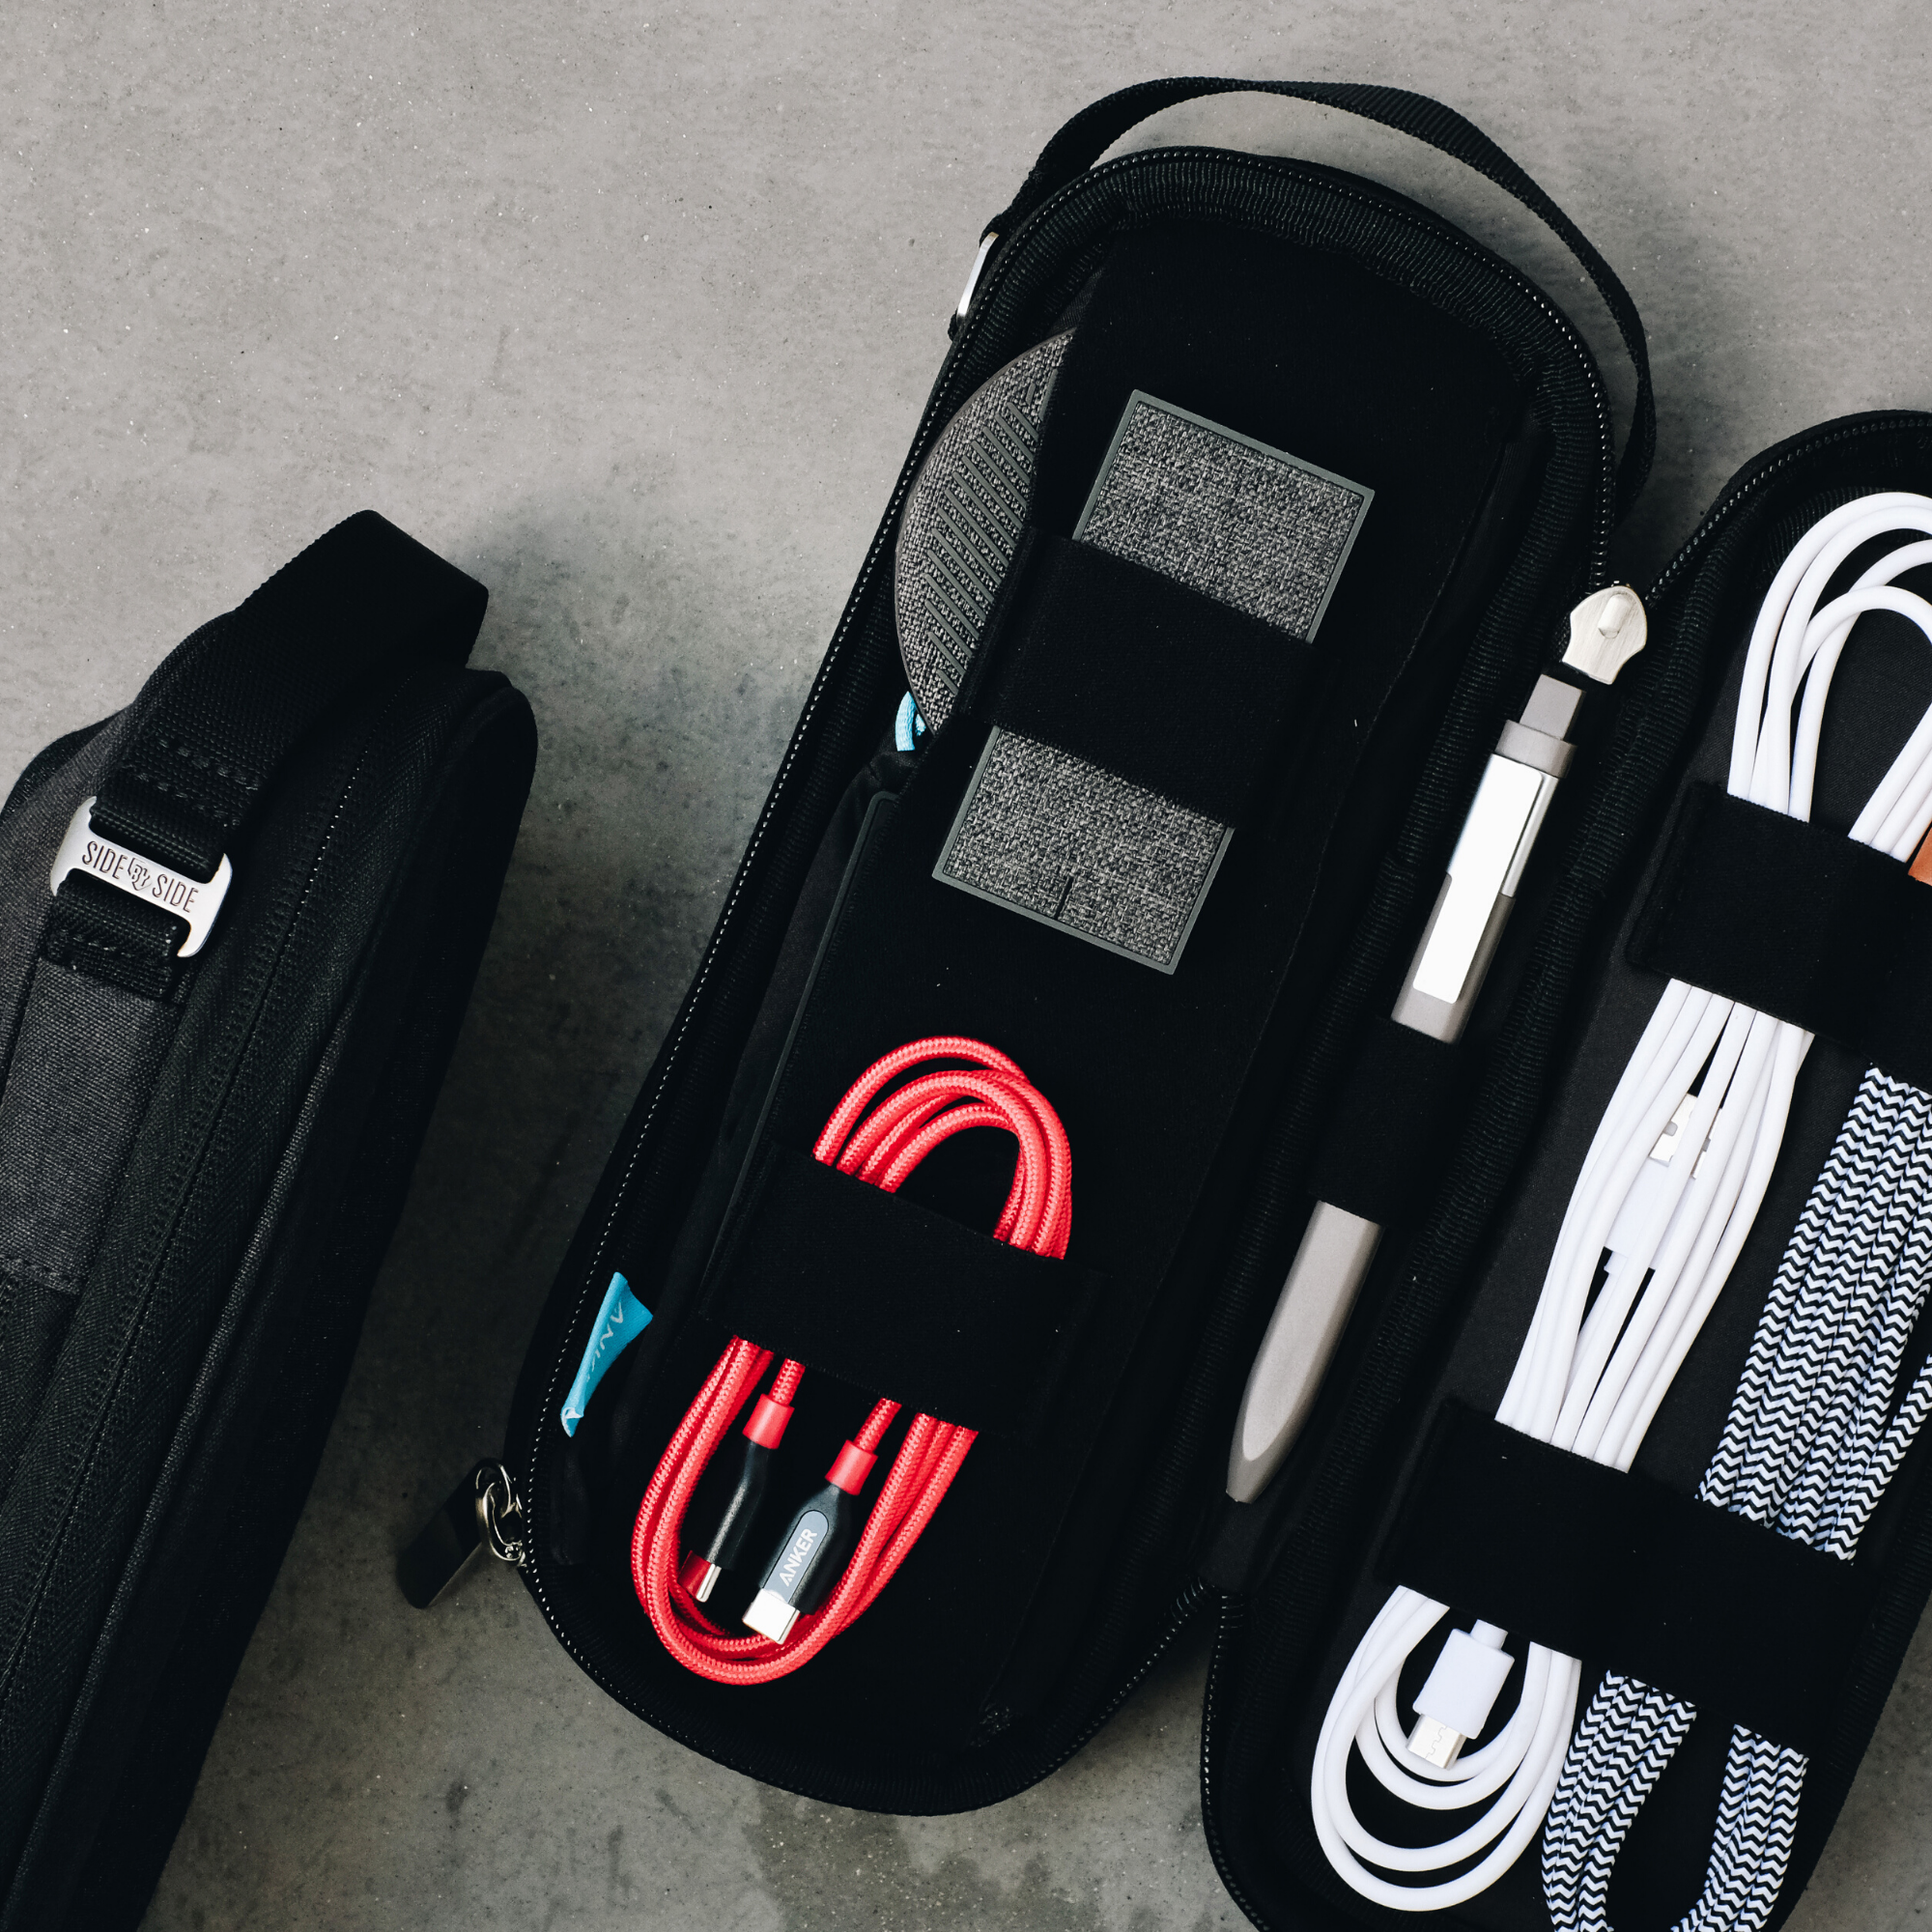 SIDE BY SIDE Power Packer | Travel Cord Organizer